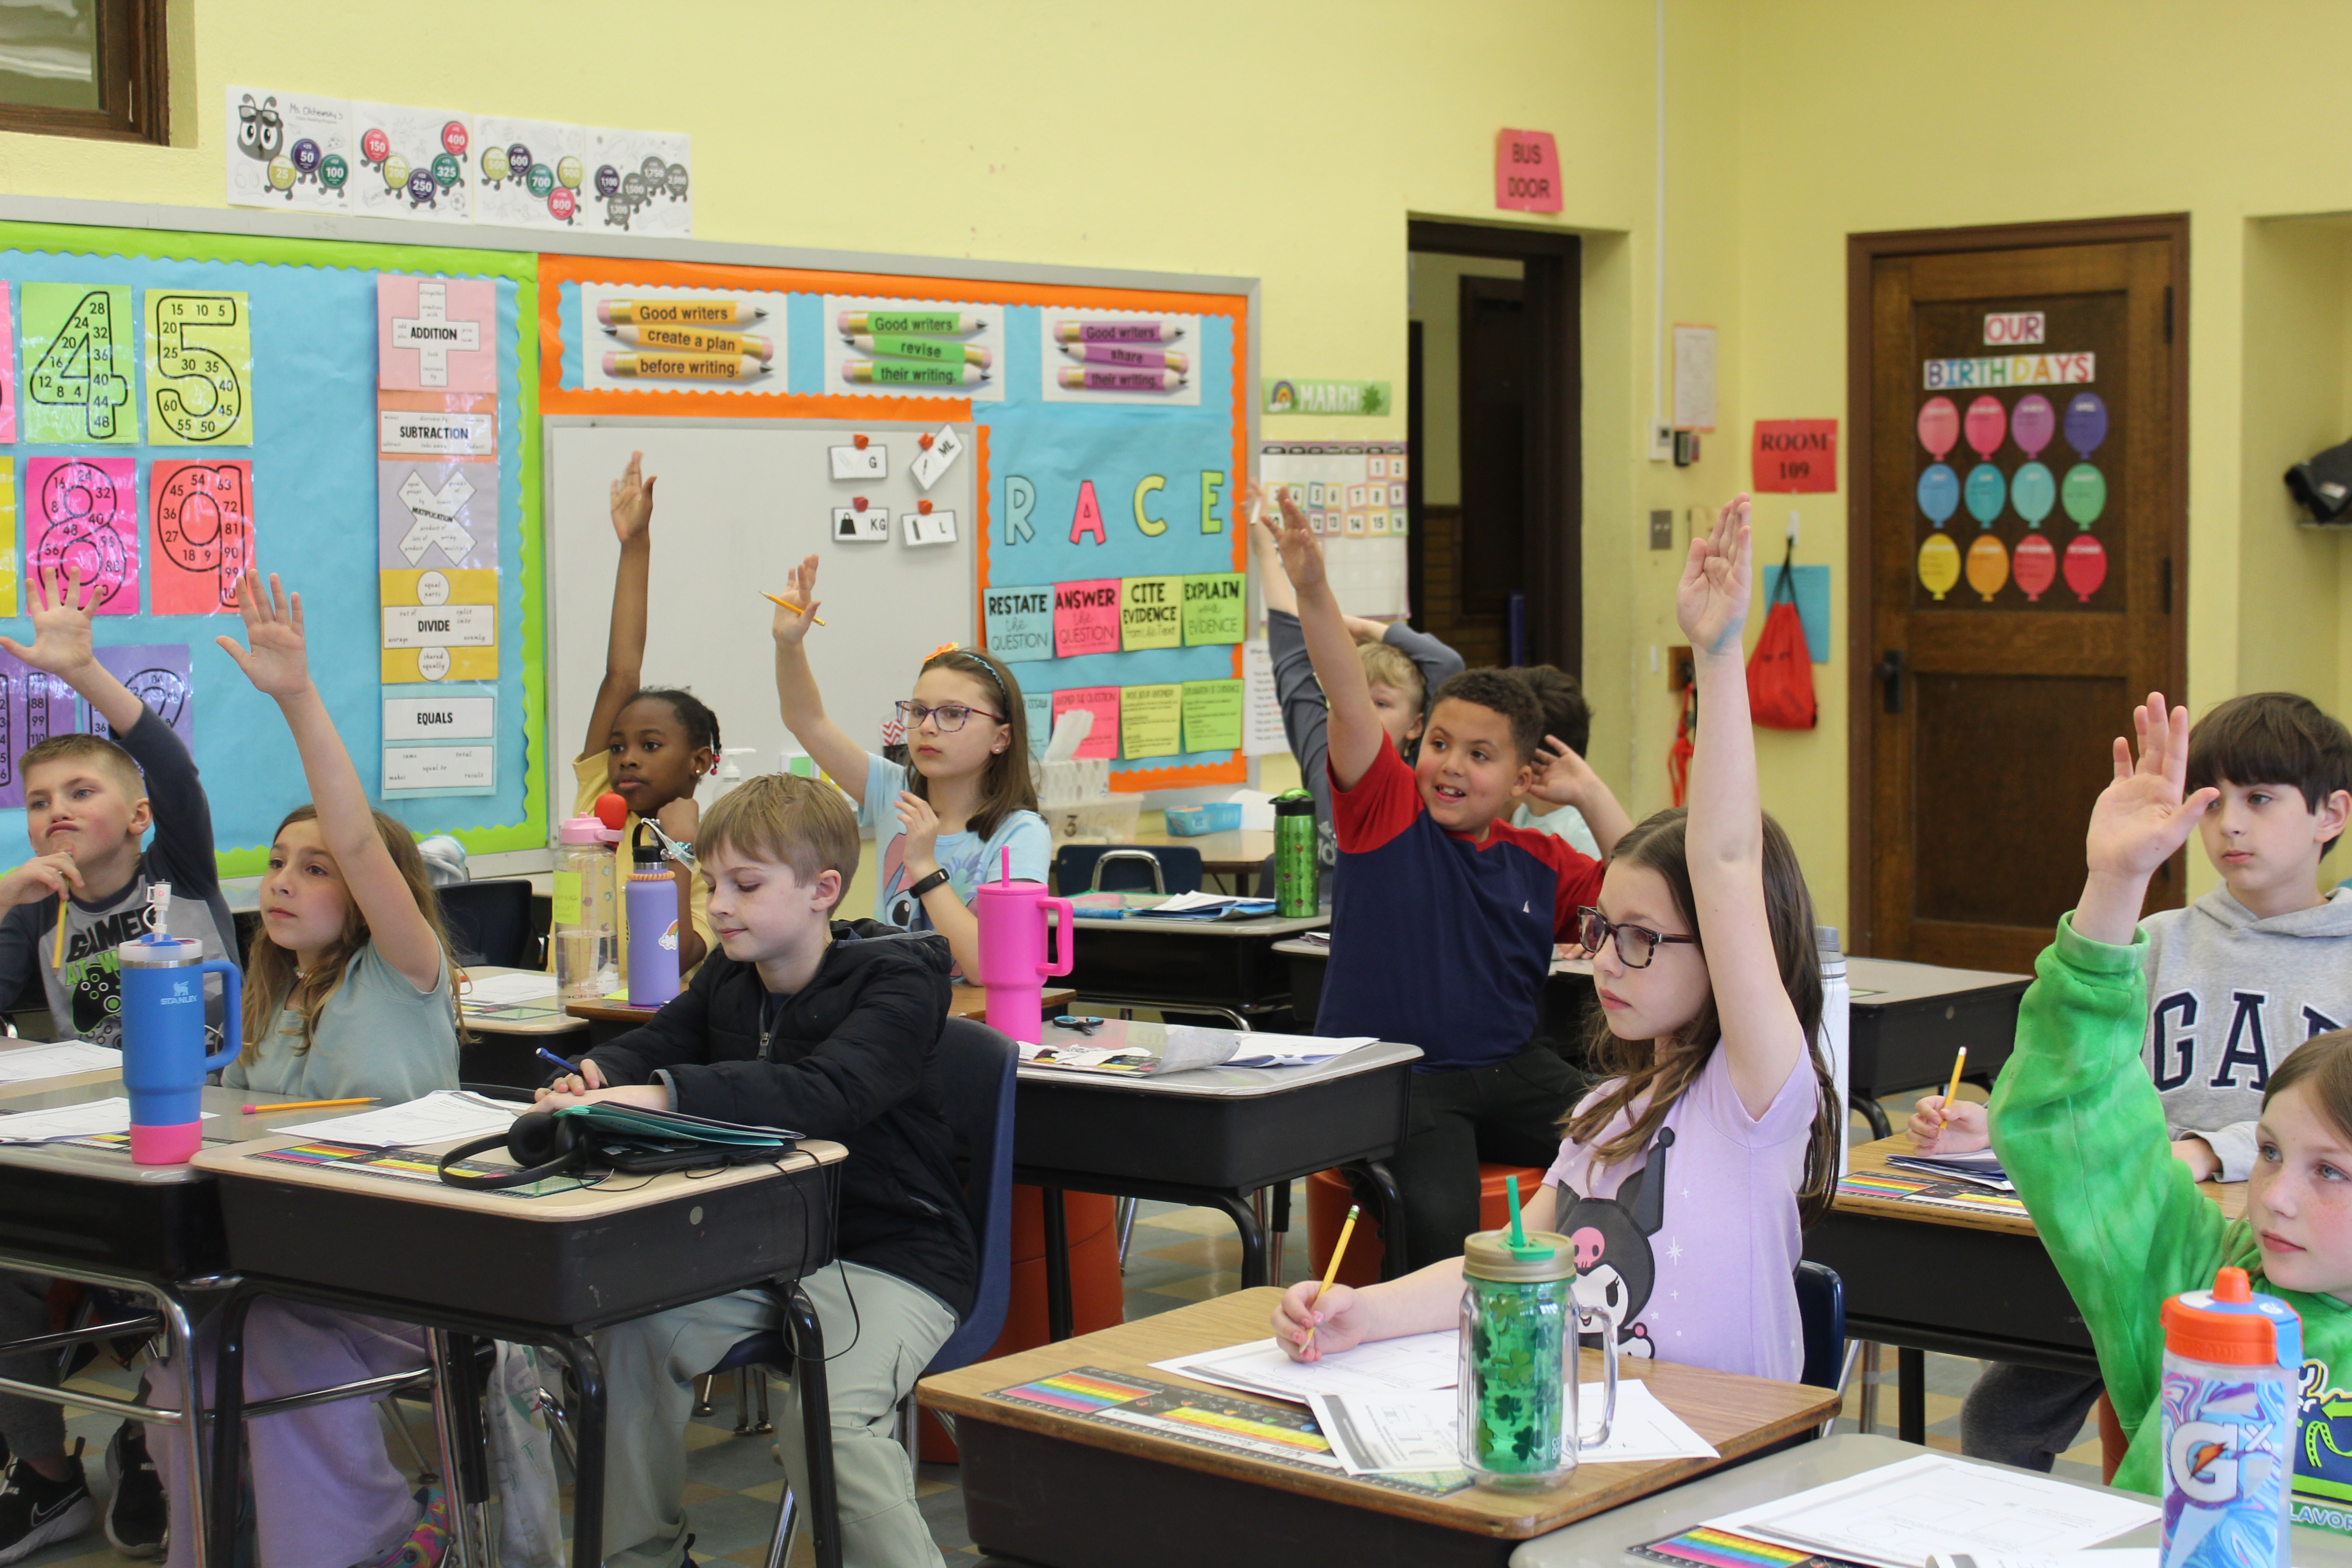 Students in classroom raising their hands.